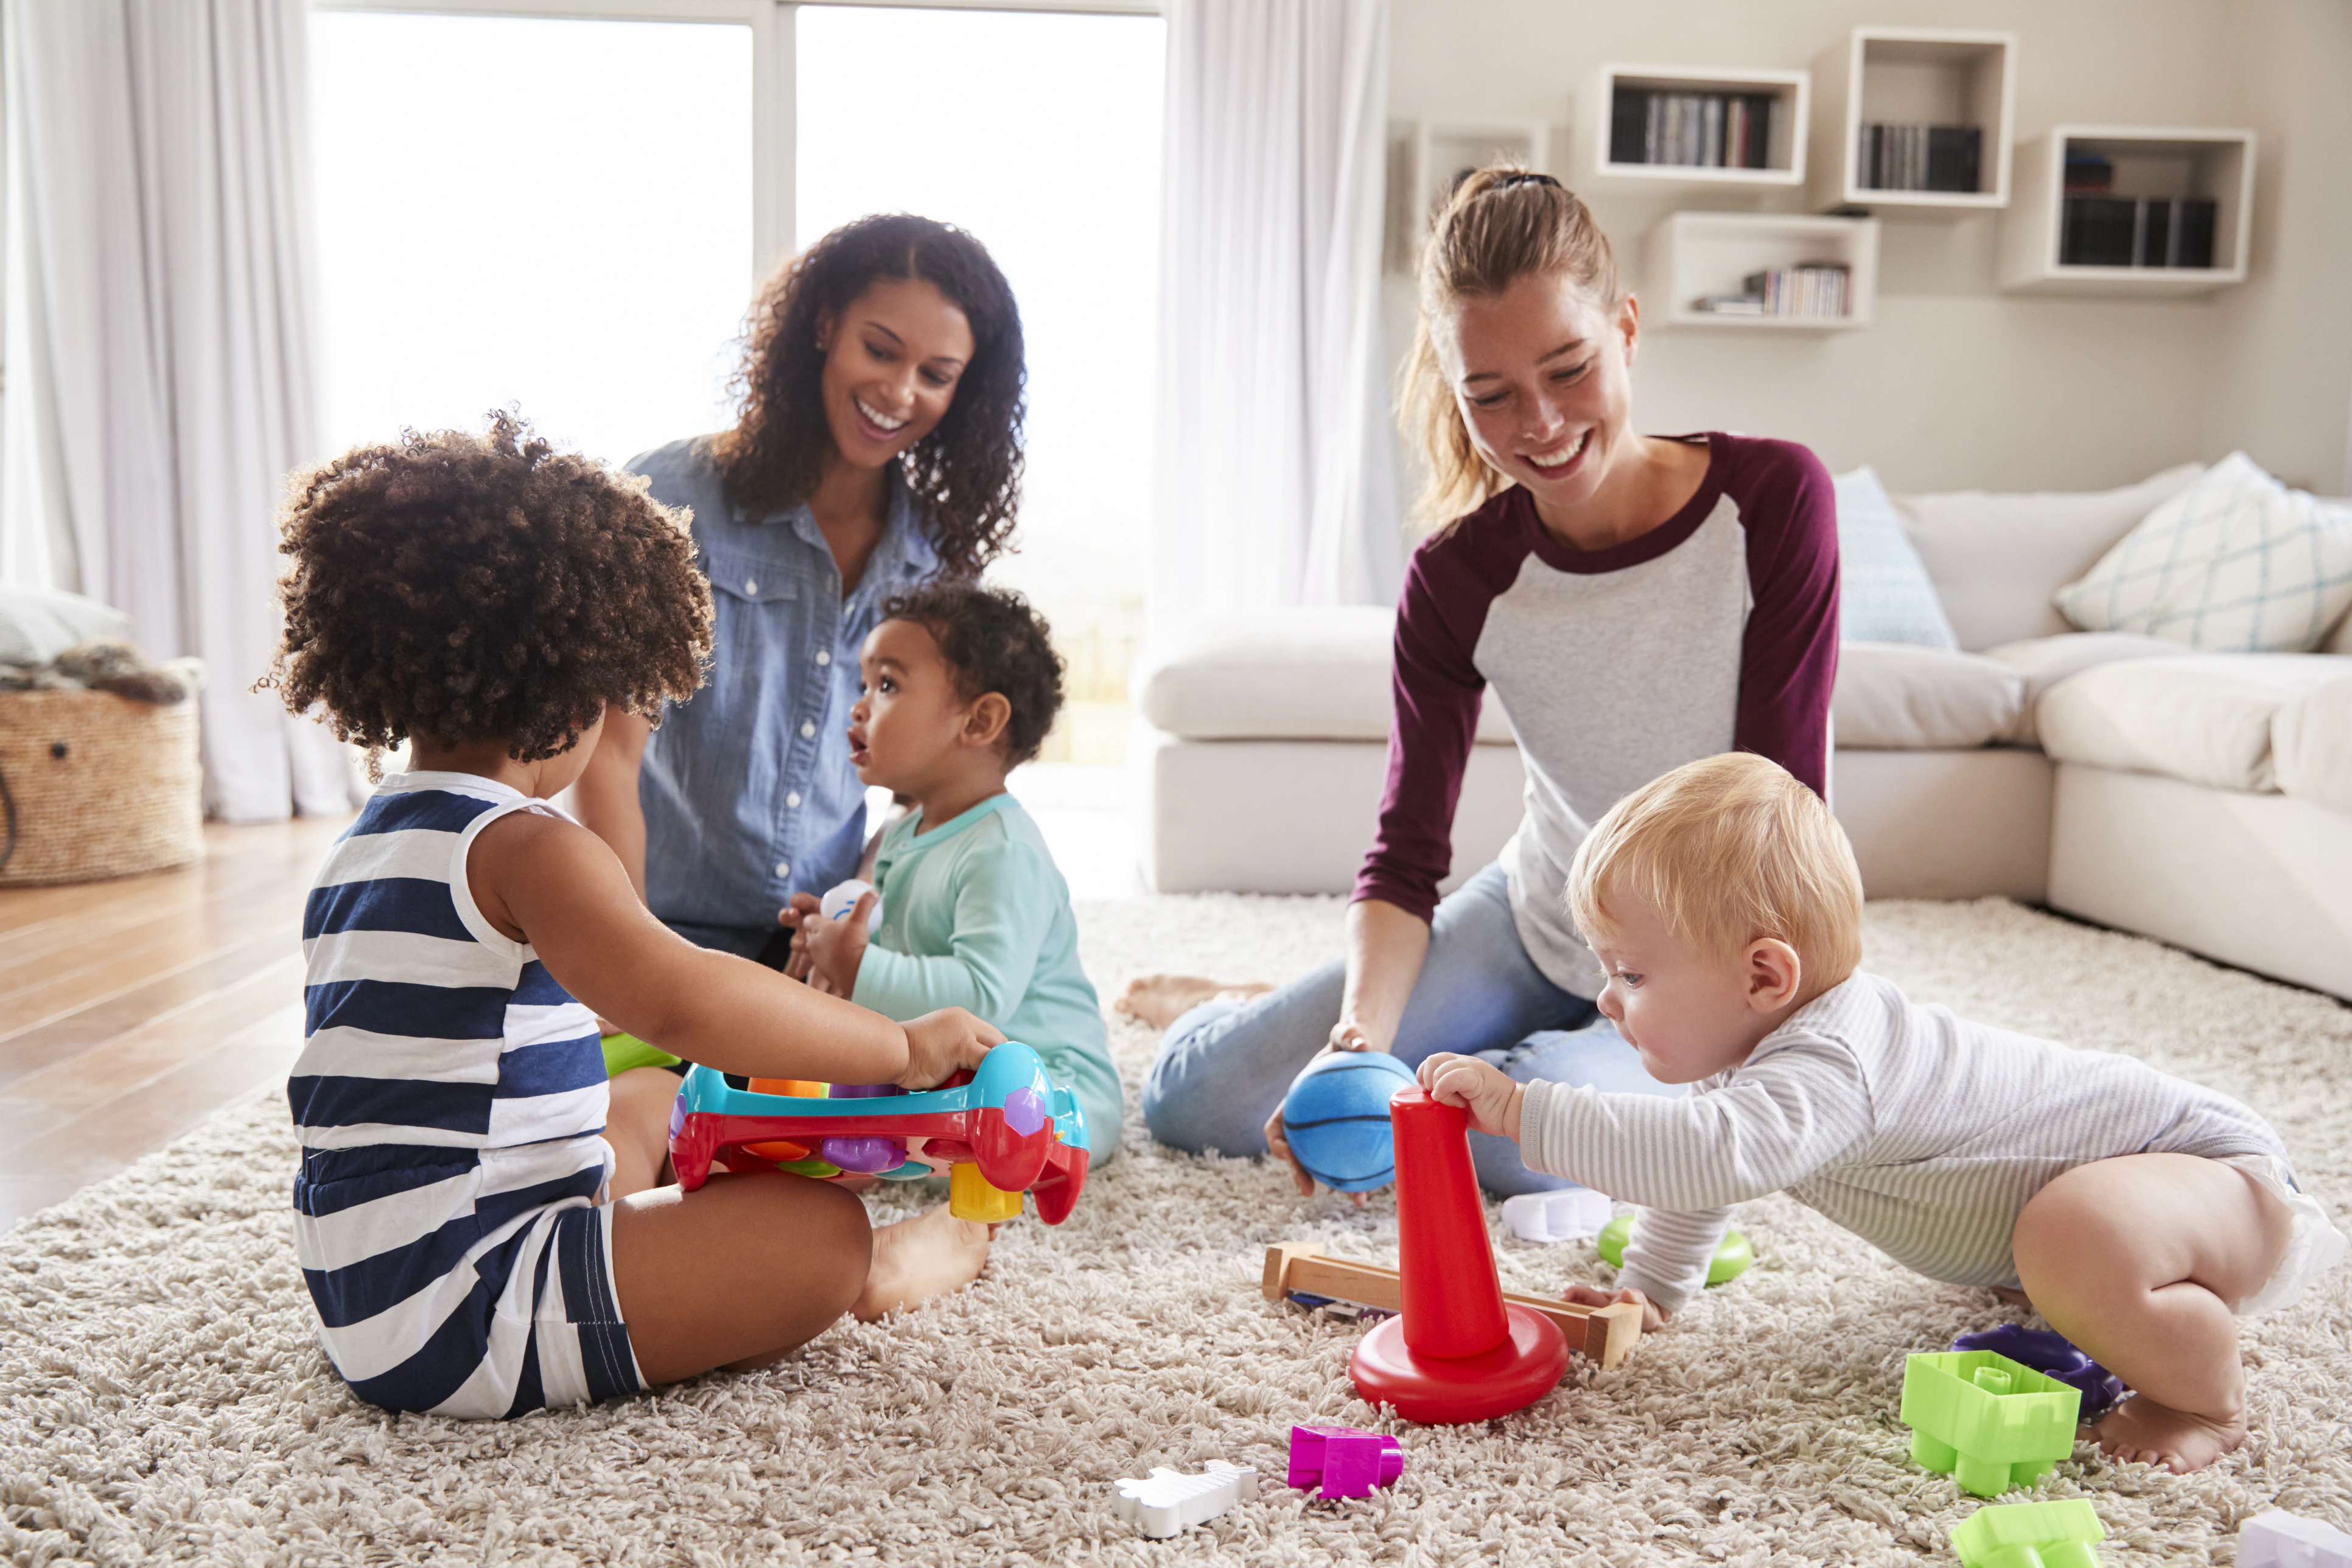 Getting started with employee childcare benefits is easy: identify where care is needed, find a flexible childcare network, and decide on a level of support.